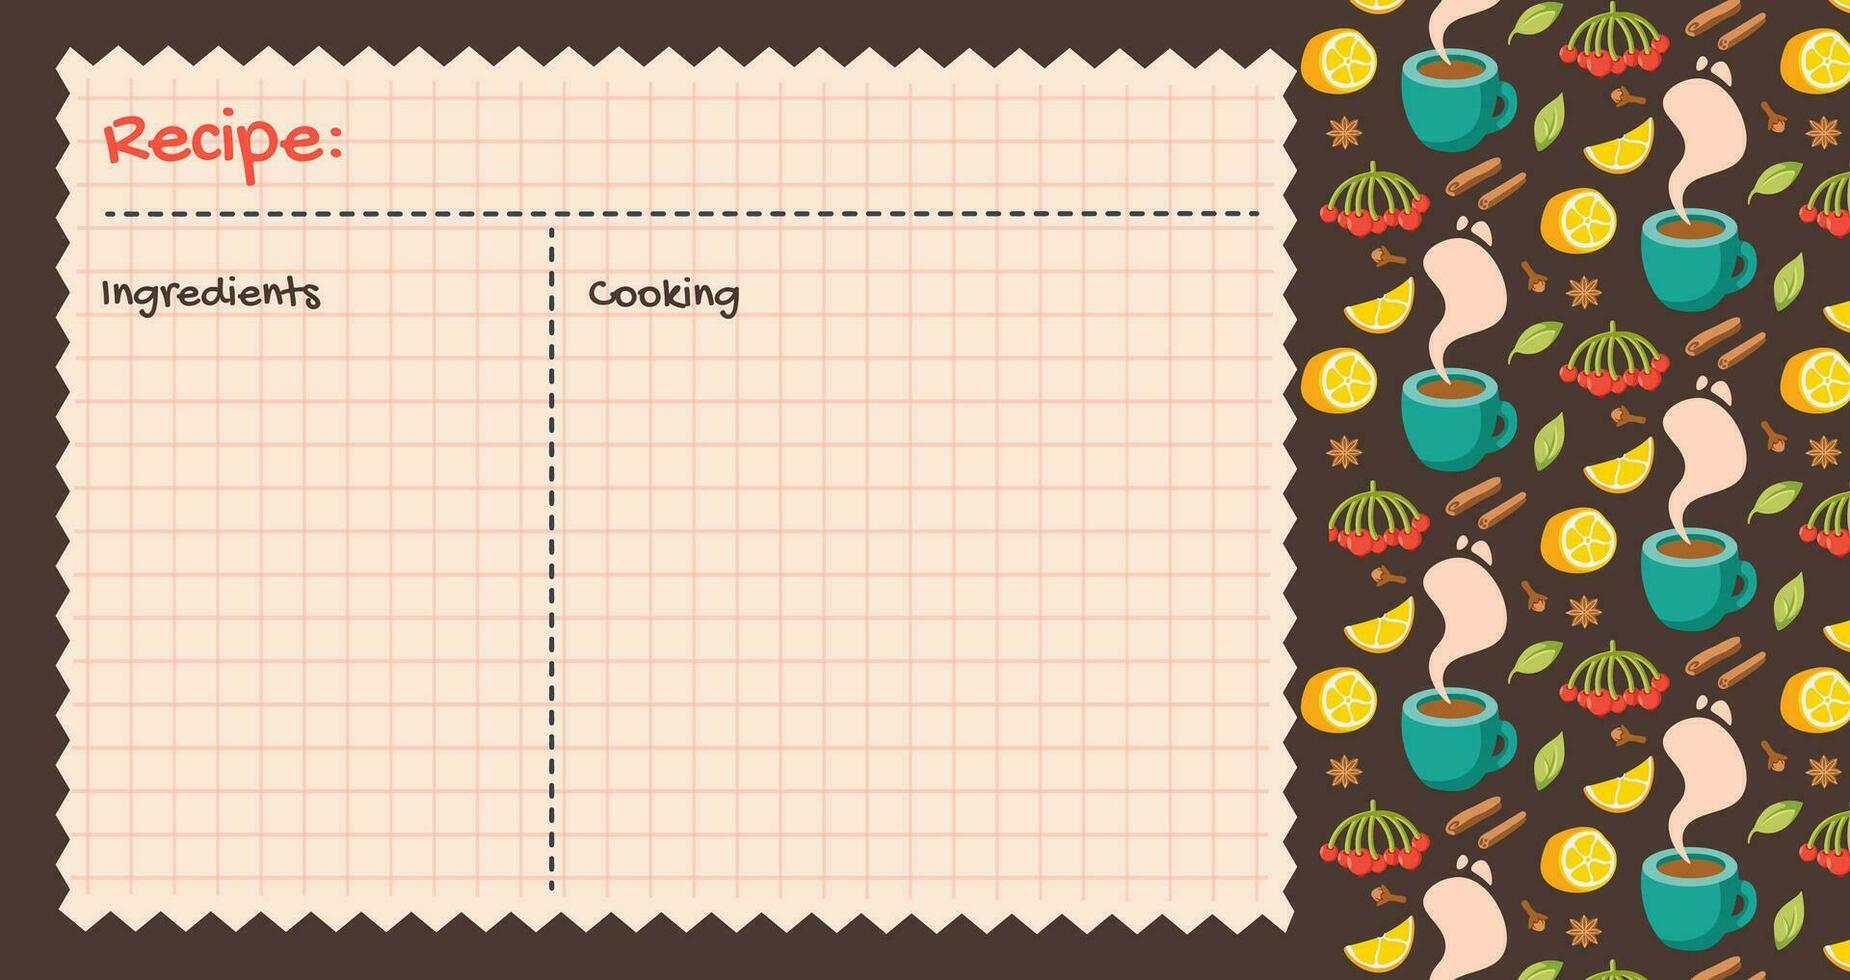 https://static.vecteezy.com/system/resources/previews/033/981/936/non_2x/recipe-cards-culinary-book-blank-pages-pattern-with-hot-drink-lemons-and-spices-cookbook-stickers-cute-home-menu-flat-illustration-vector.jpg